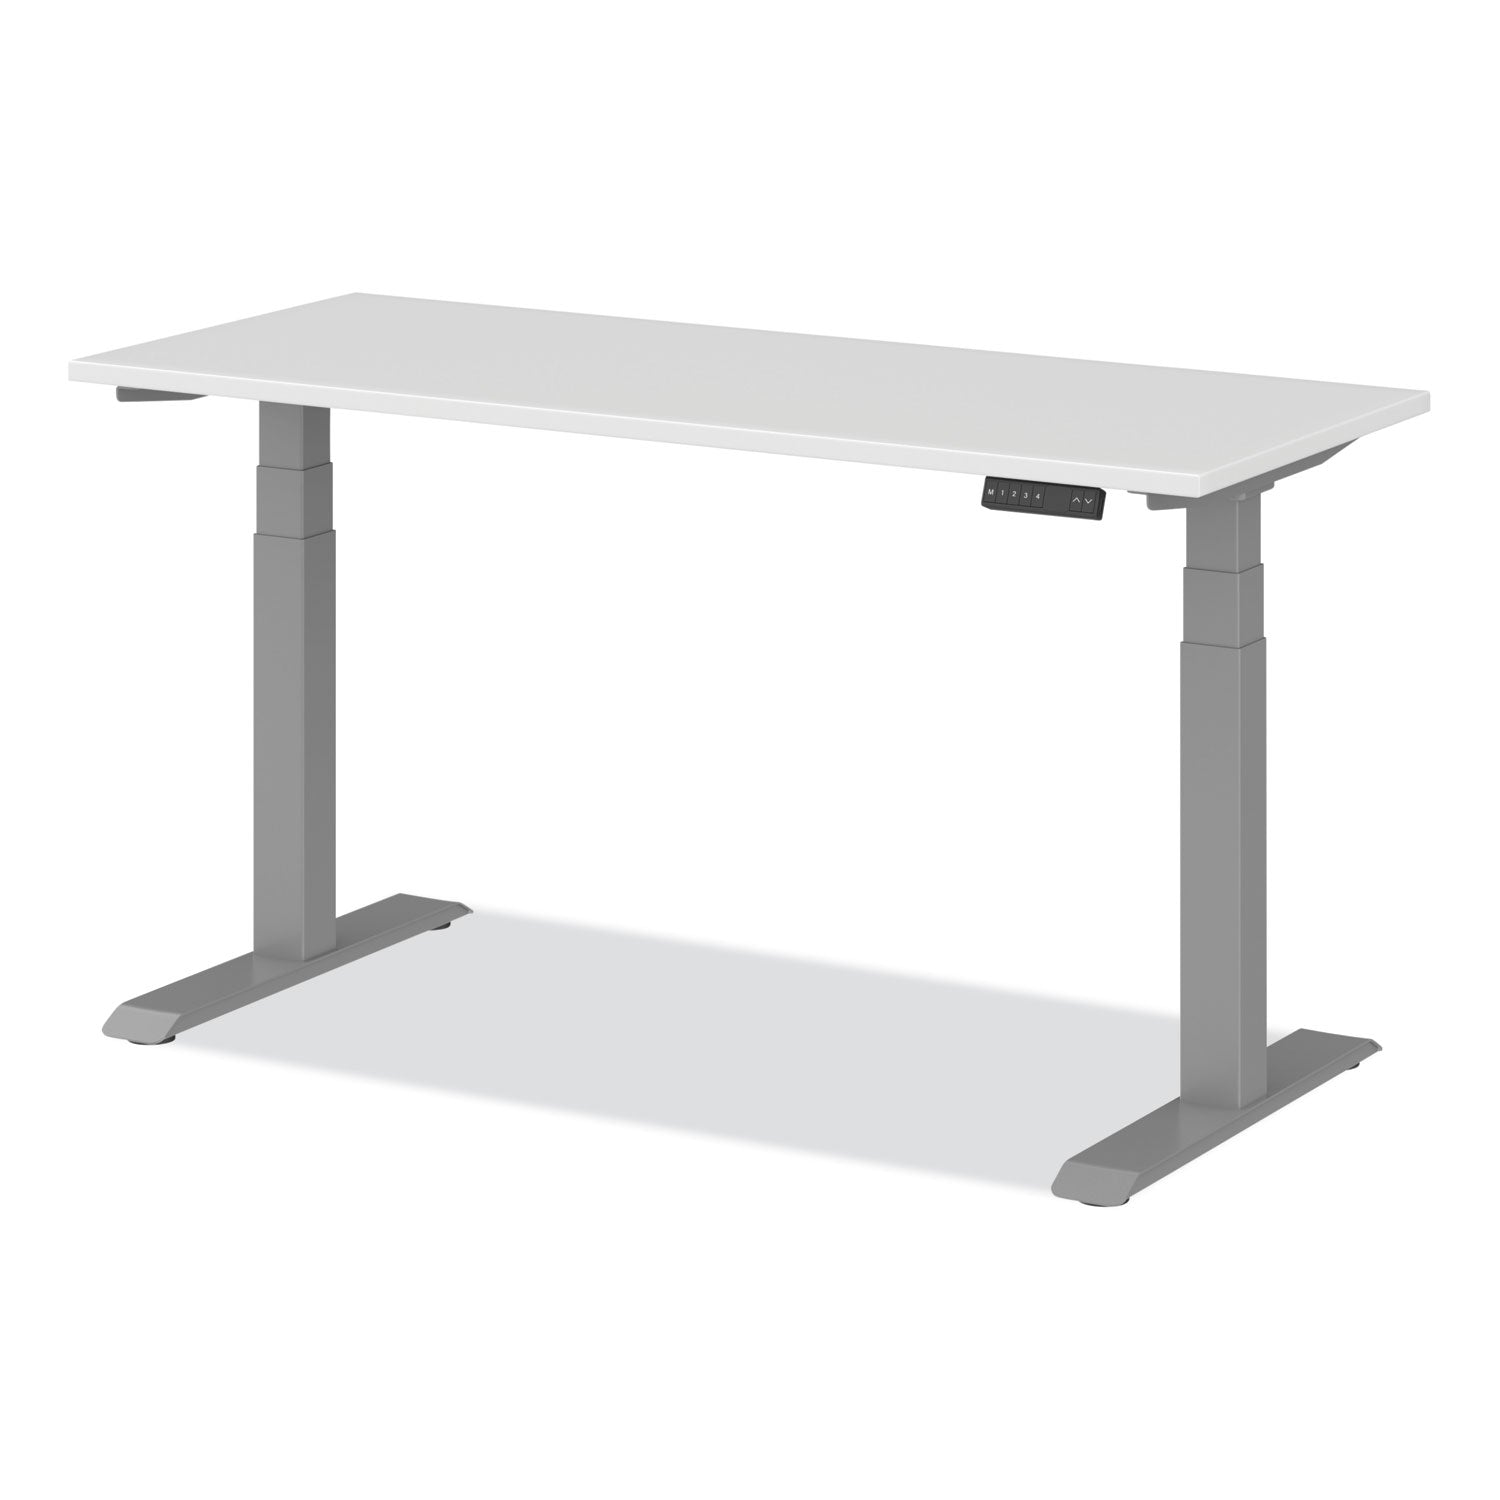 adaptivergo-sit-stand-three-stage-electric-height-adjustable-table-with-memory-controls-60-x-24-x-30-to-49-white_aleht3sagbd - 3